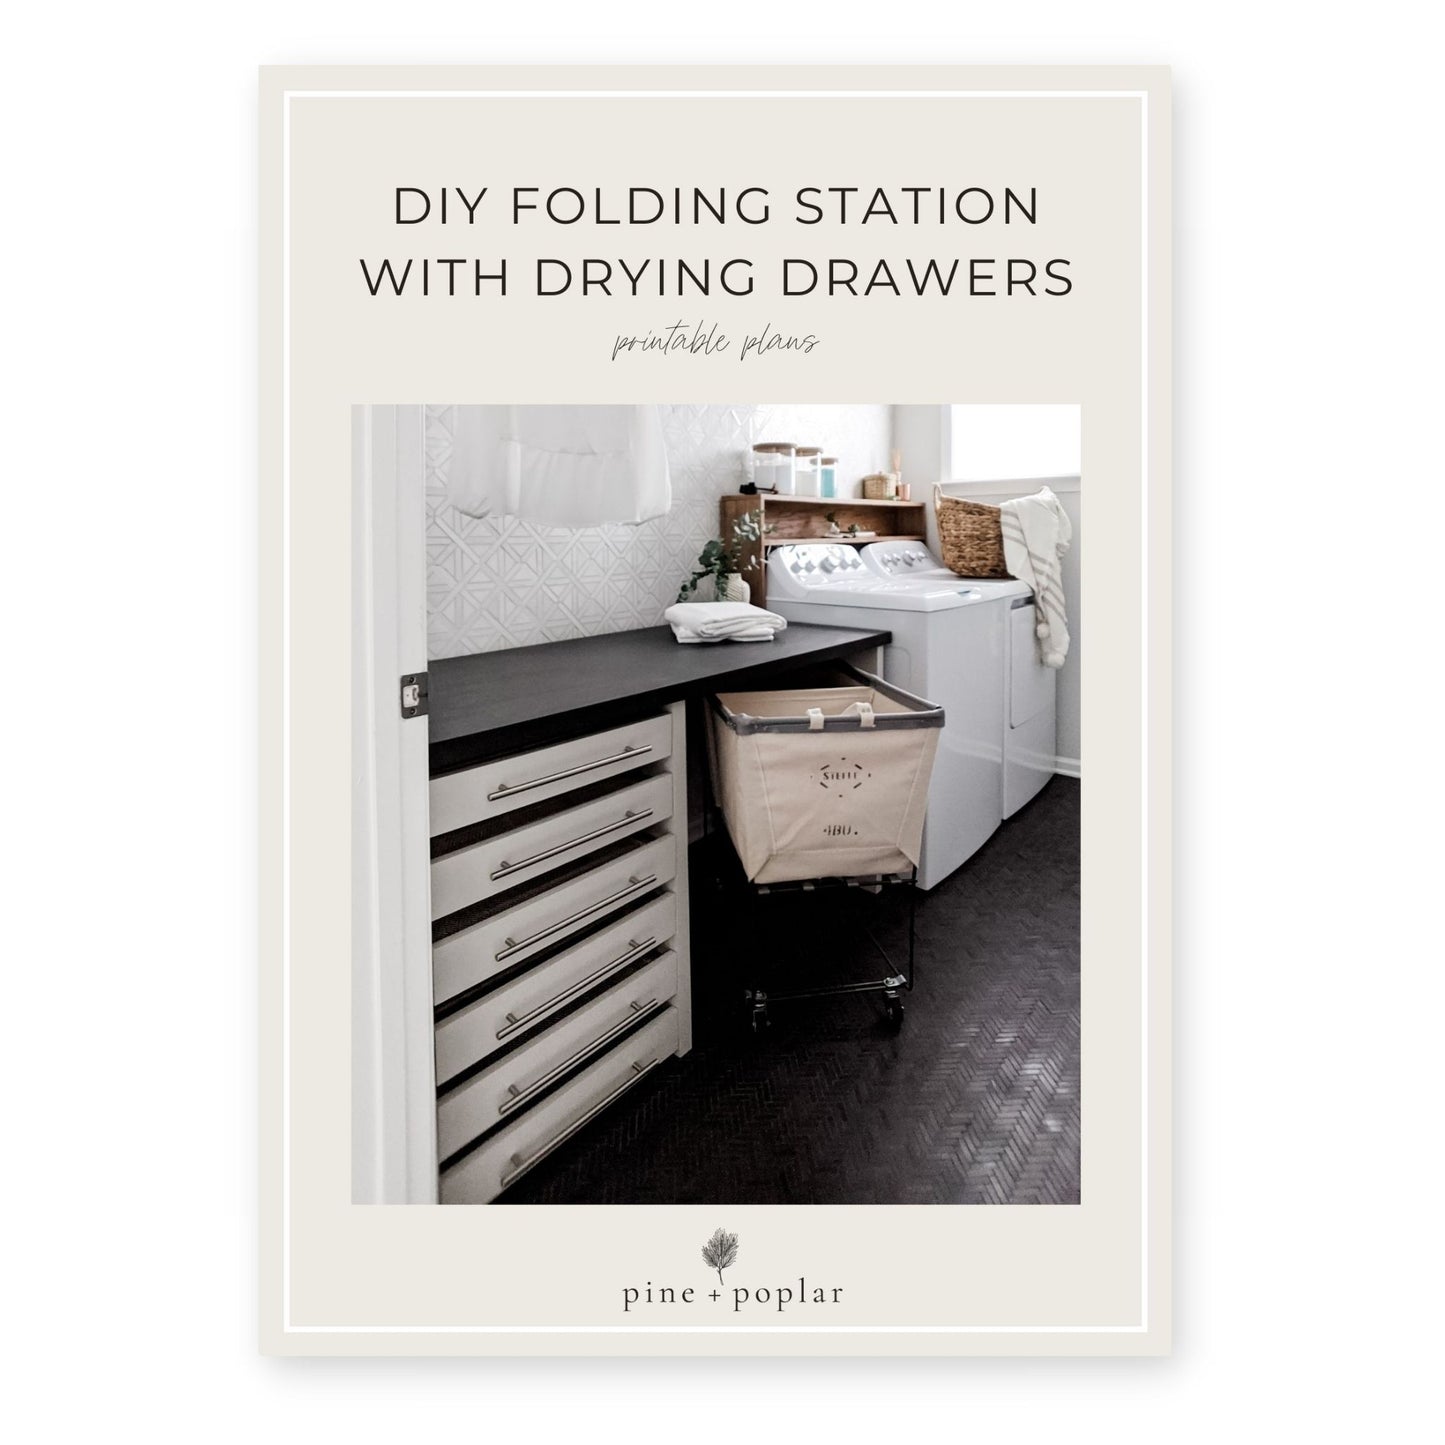 The Ultimate Laundry Folding Station Printable Plans